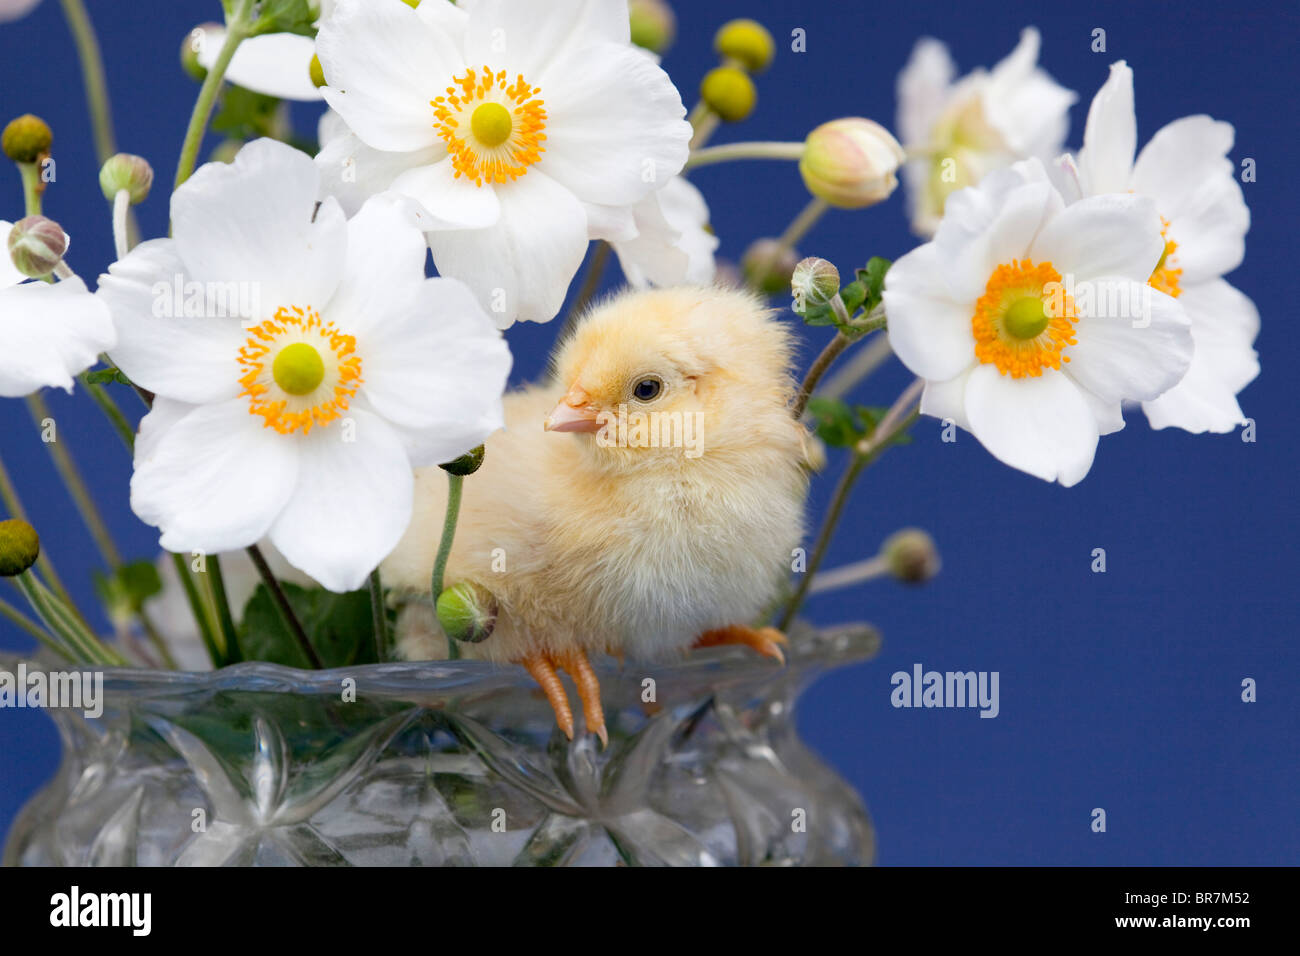 Chick with flowers Stock Photo